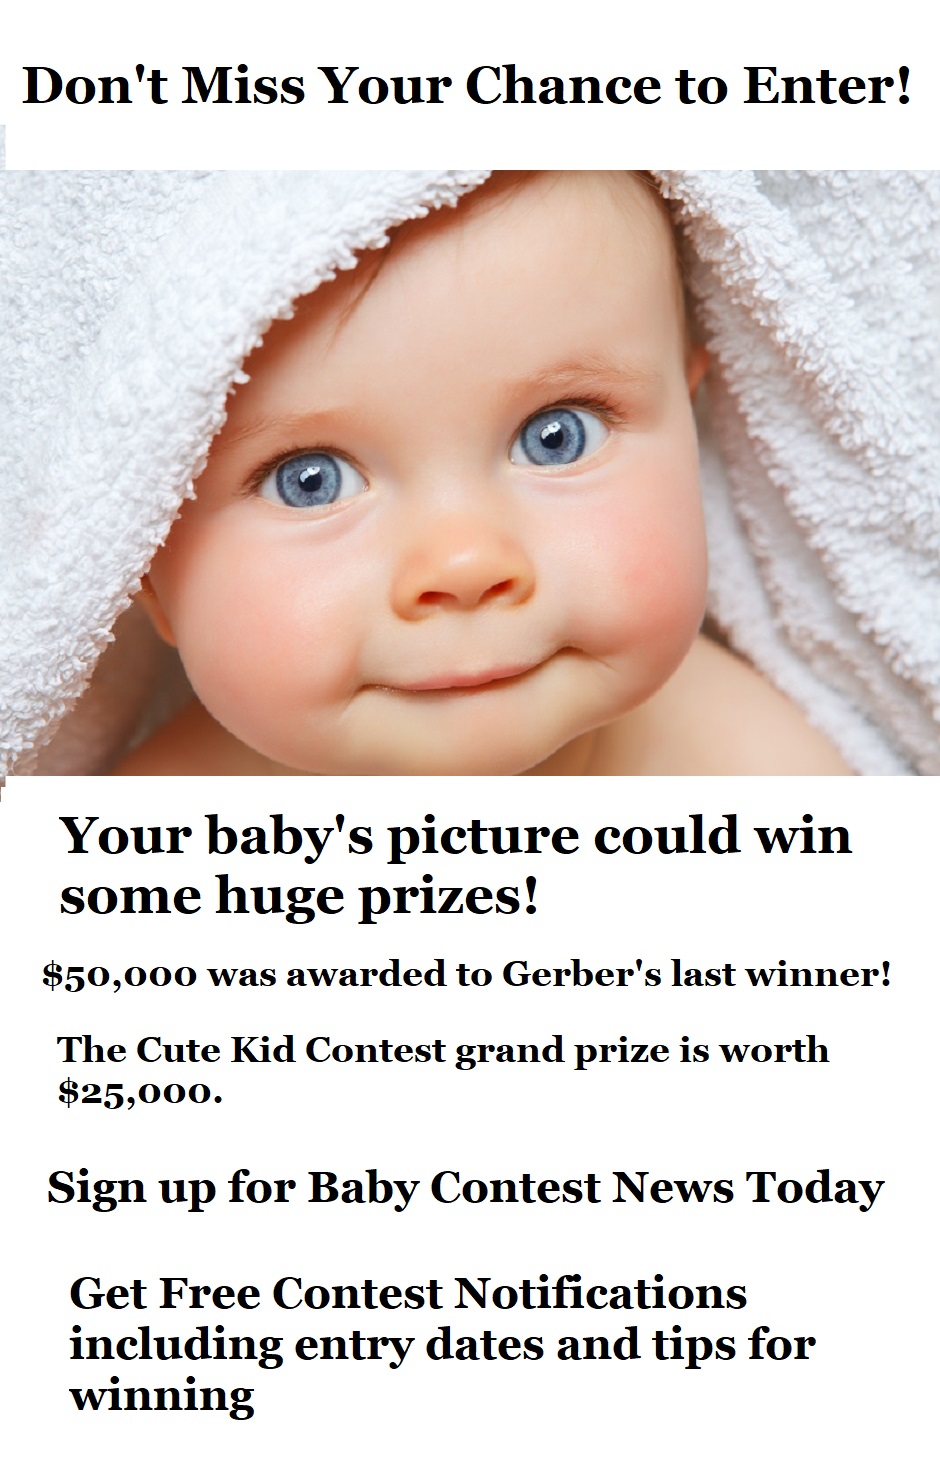 gerber baby contest 2018 entry